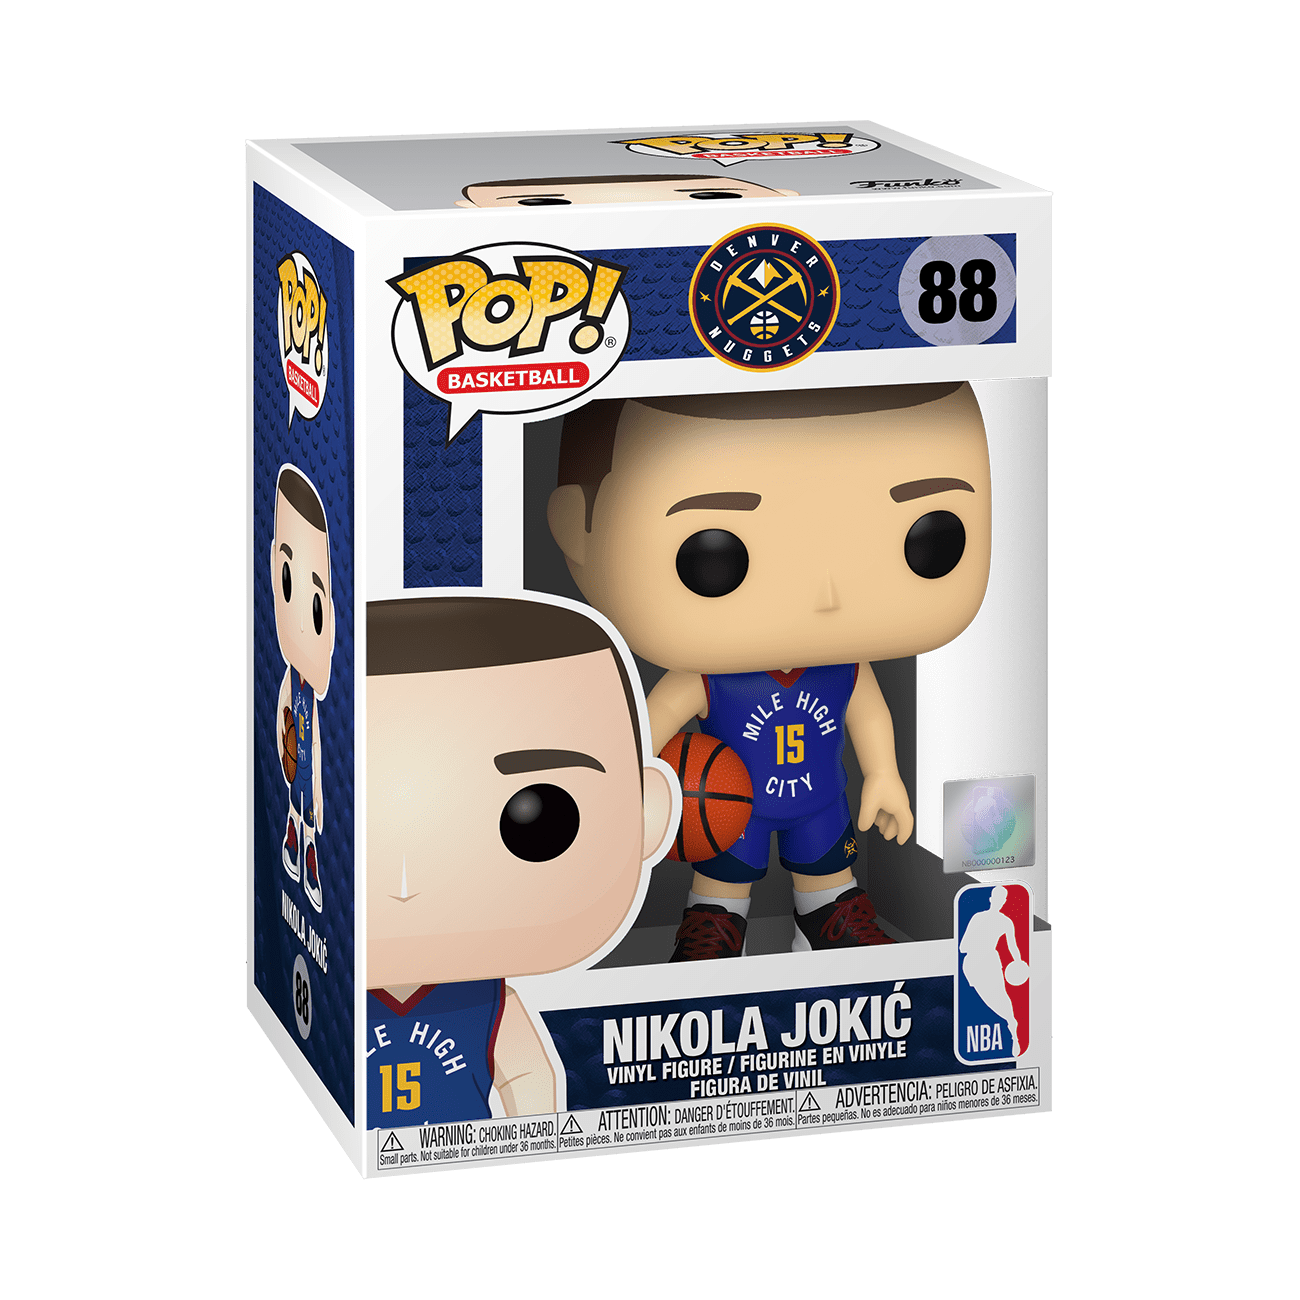 Toy News: Denver Nuggets 2023 NBA Champions 5 Pack Funko Pops